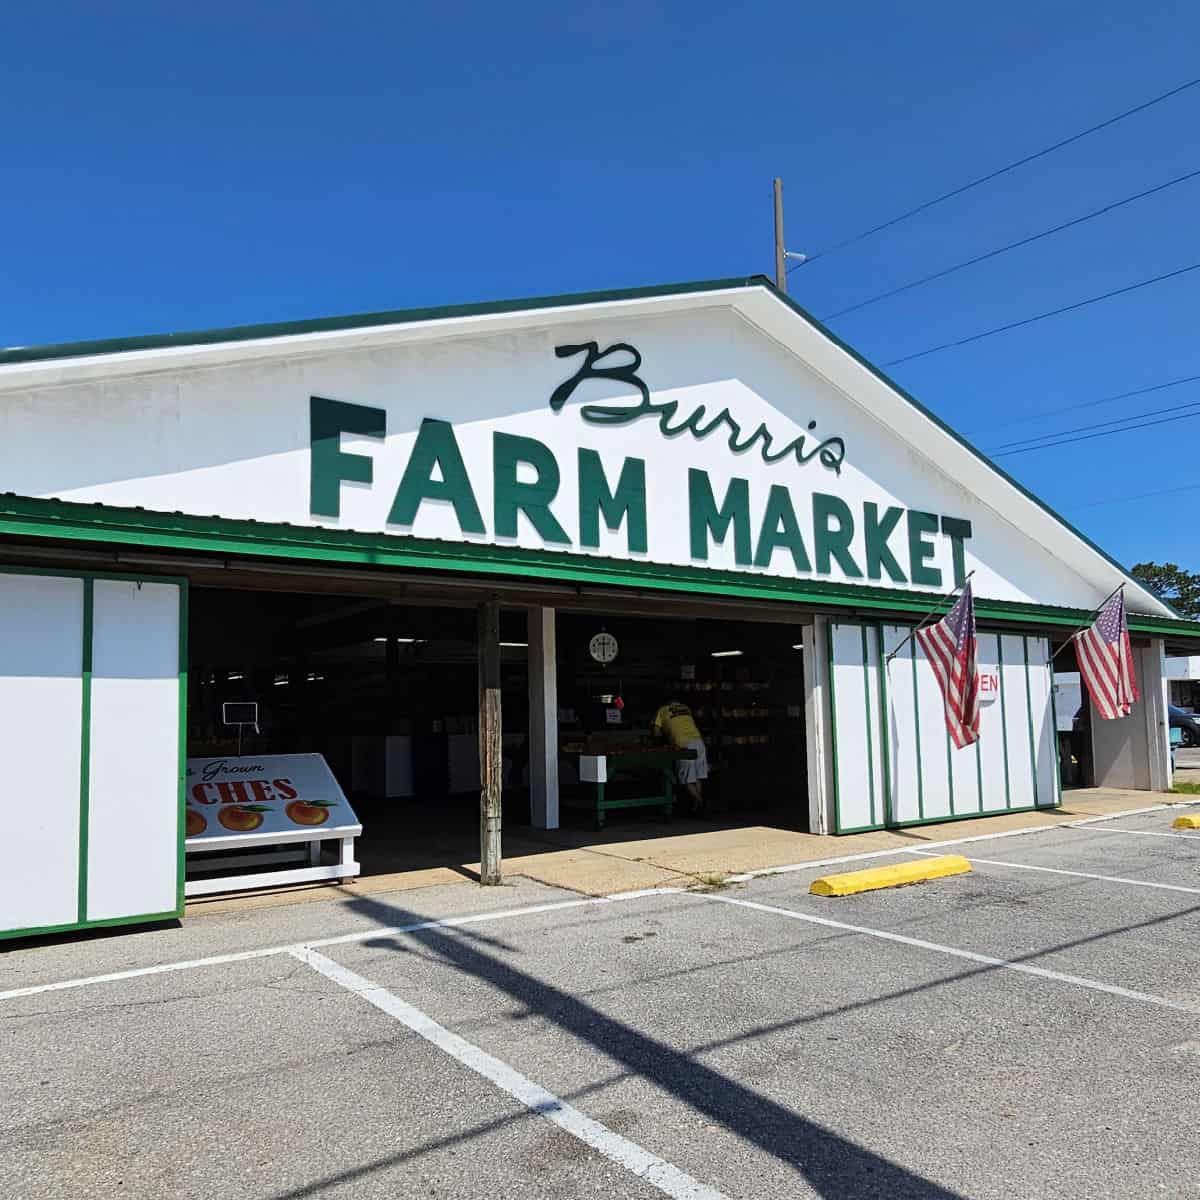 Burris Farm Market entrance with white and green building